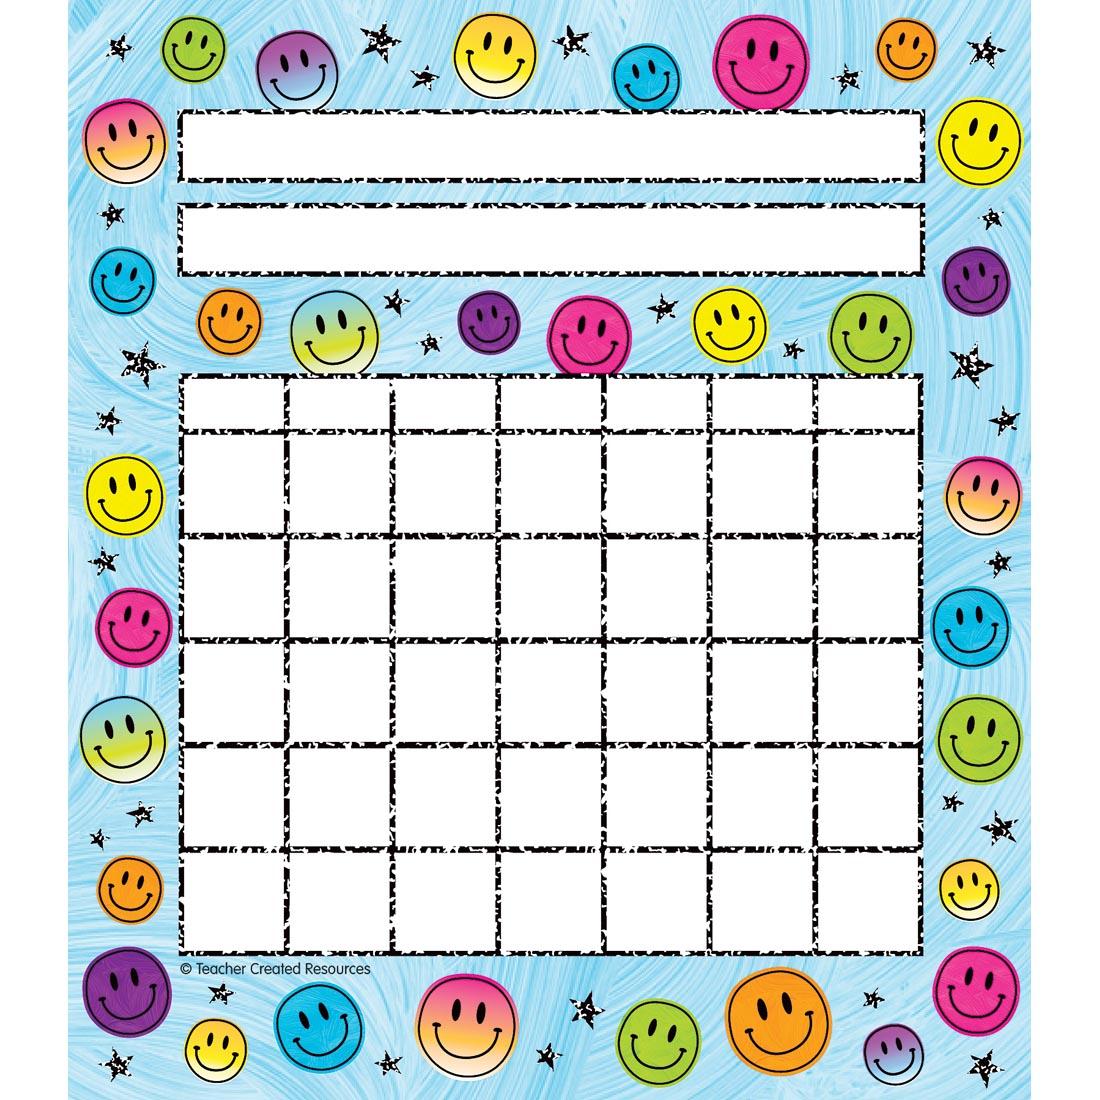 Mini Incentive Chart from the Brights 4Ever collection by Teacher Created Resources